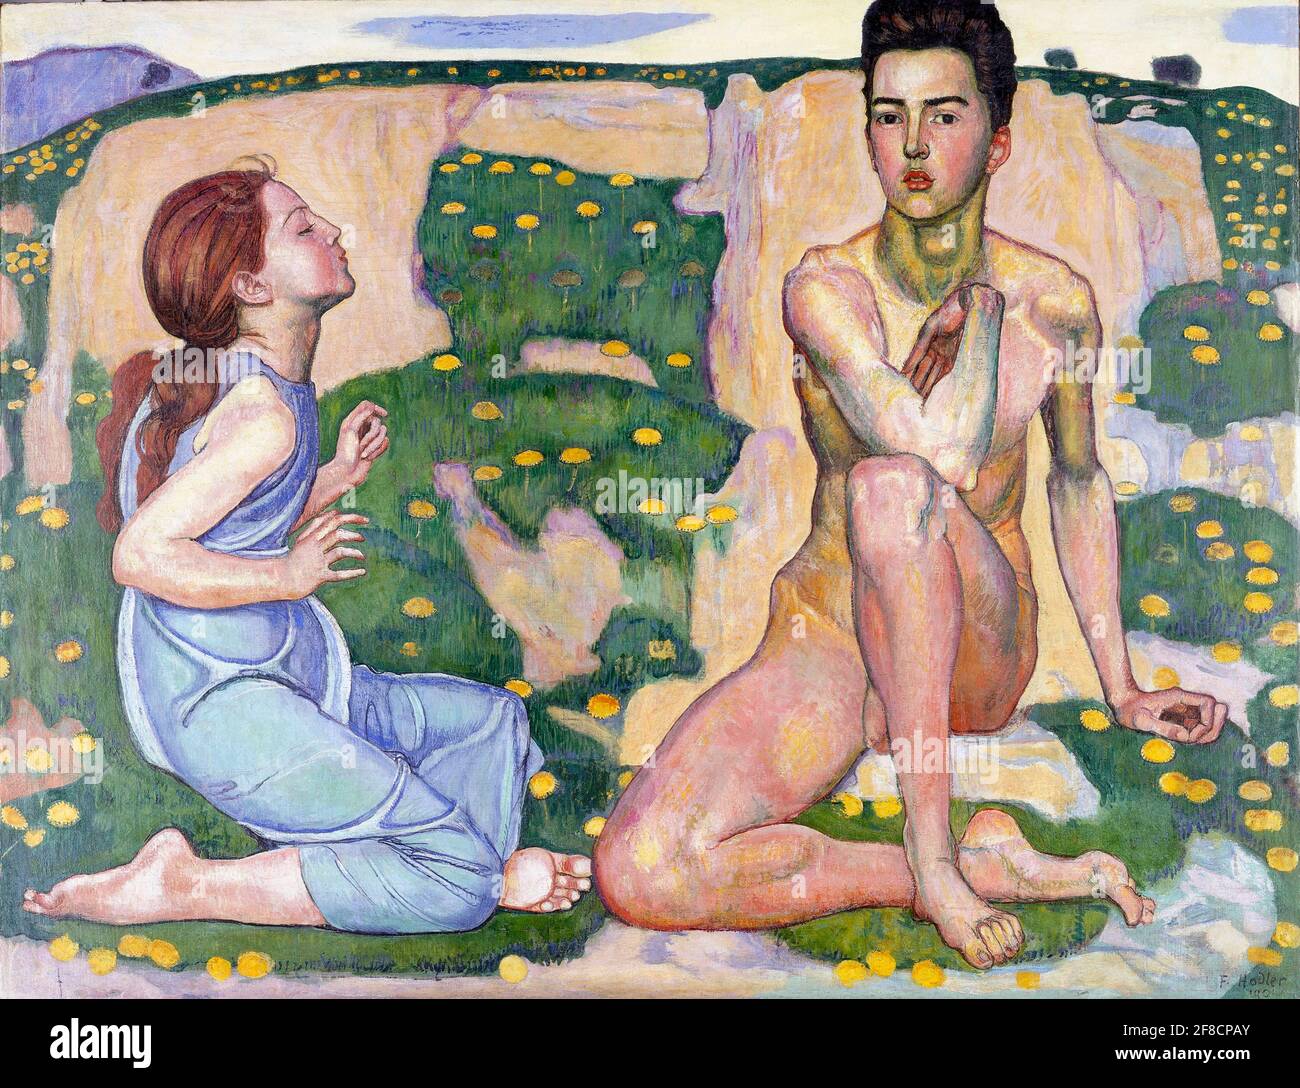 Ferdinand Hodler. Painting entitled 'Spring' by the Swiss symbolist painter, Ferdinand Hodler (1853- 1918). oil on canvas, 1901 Stock Photo